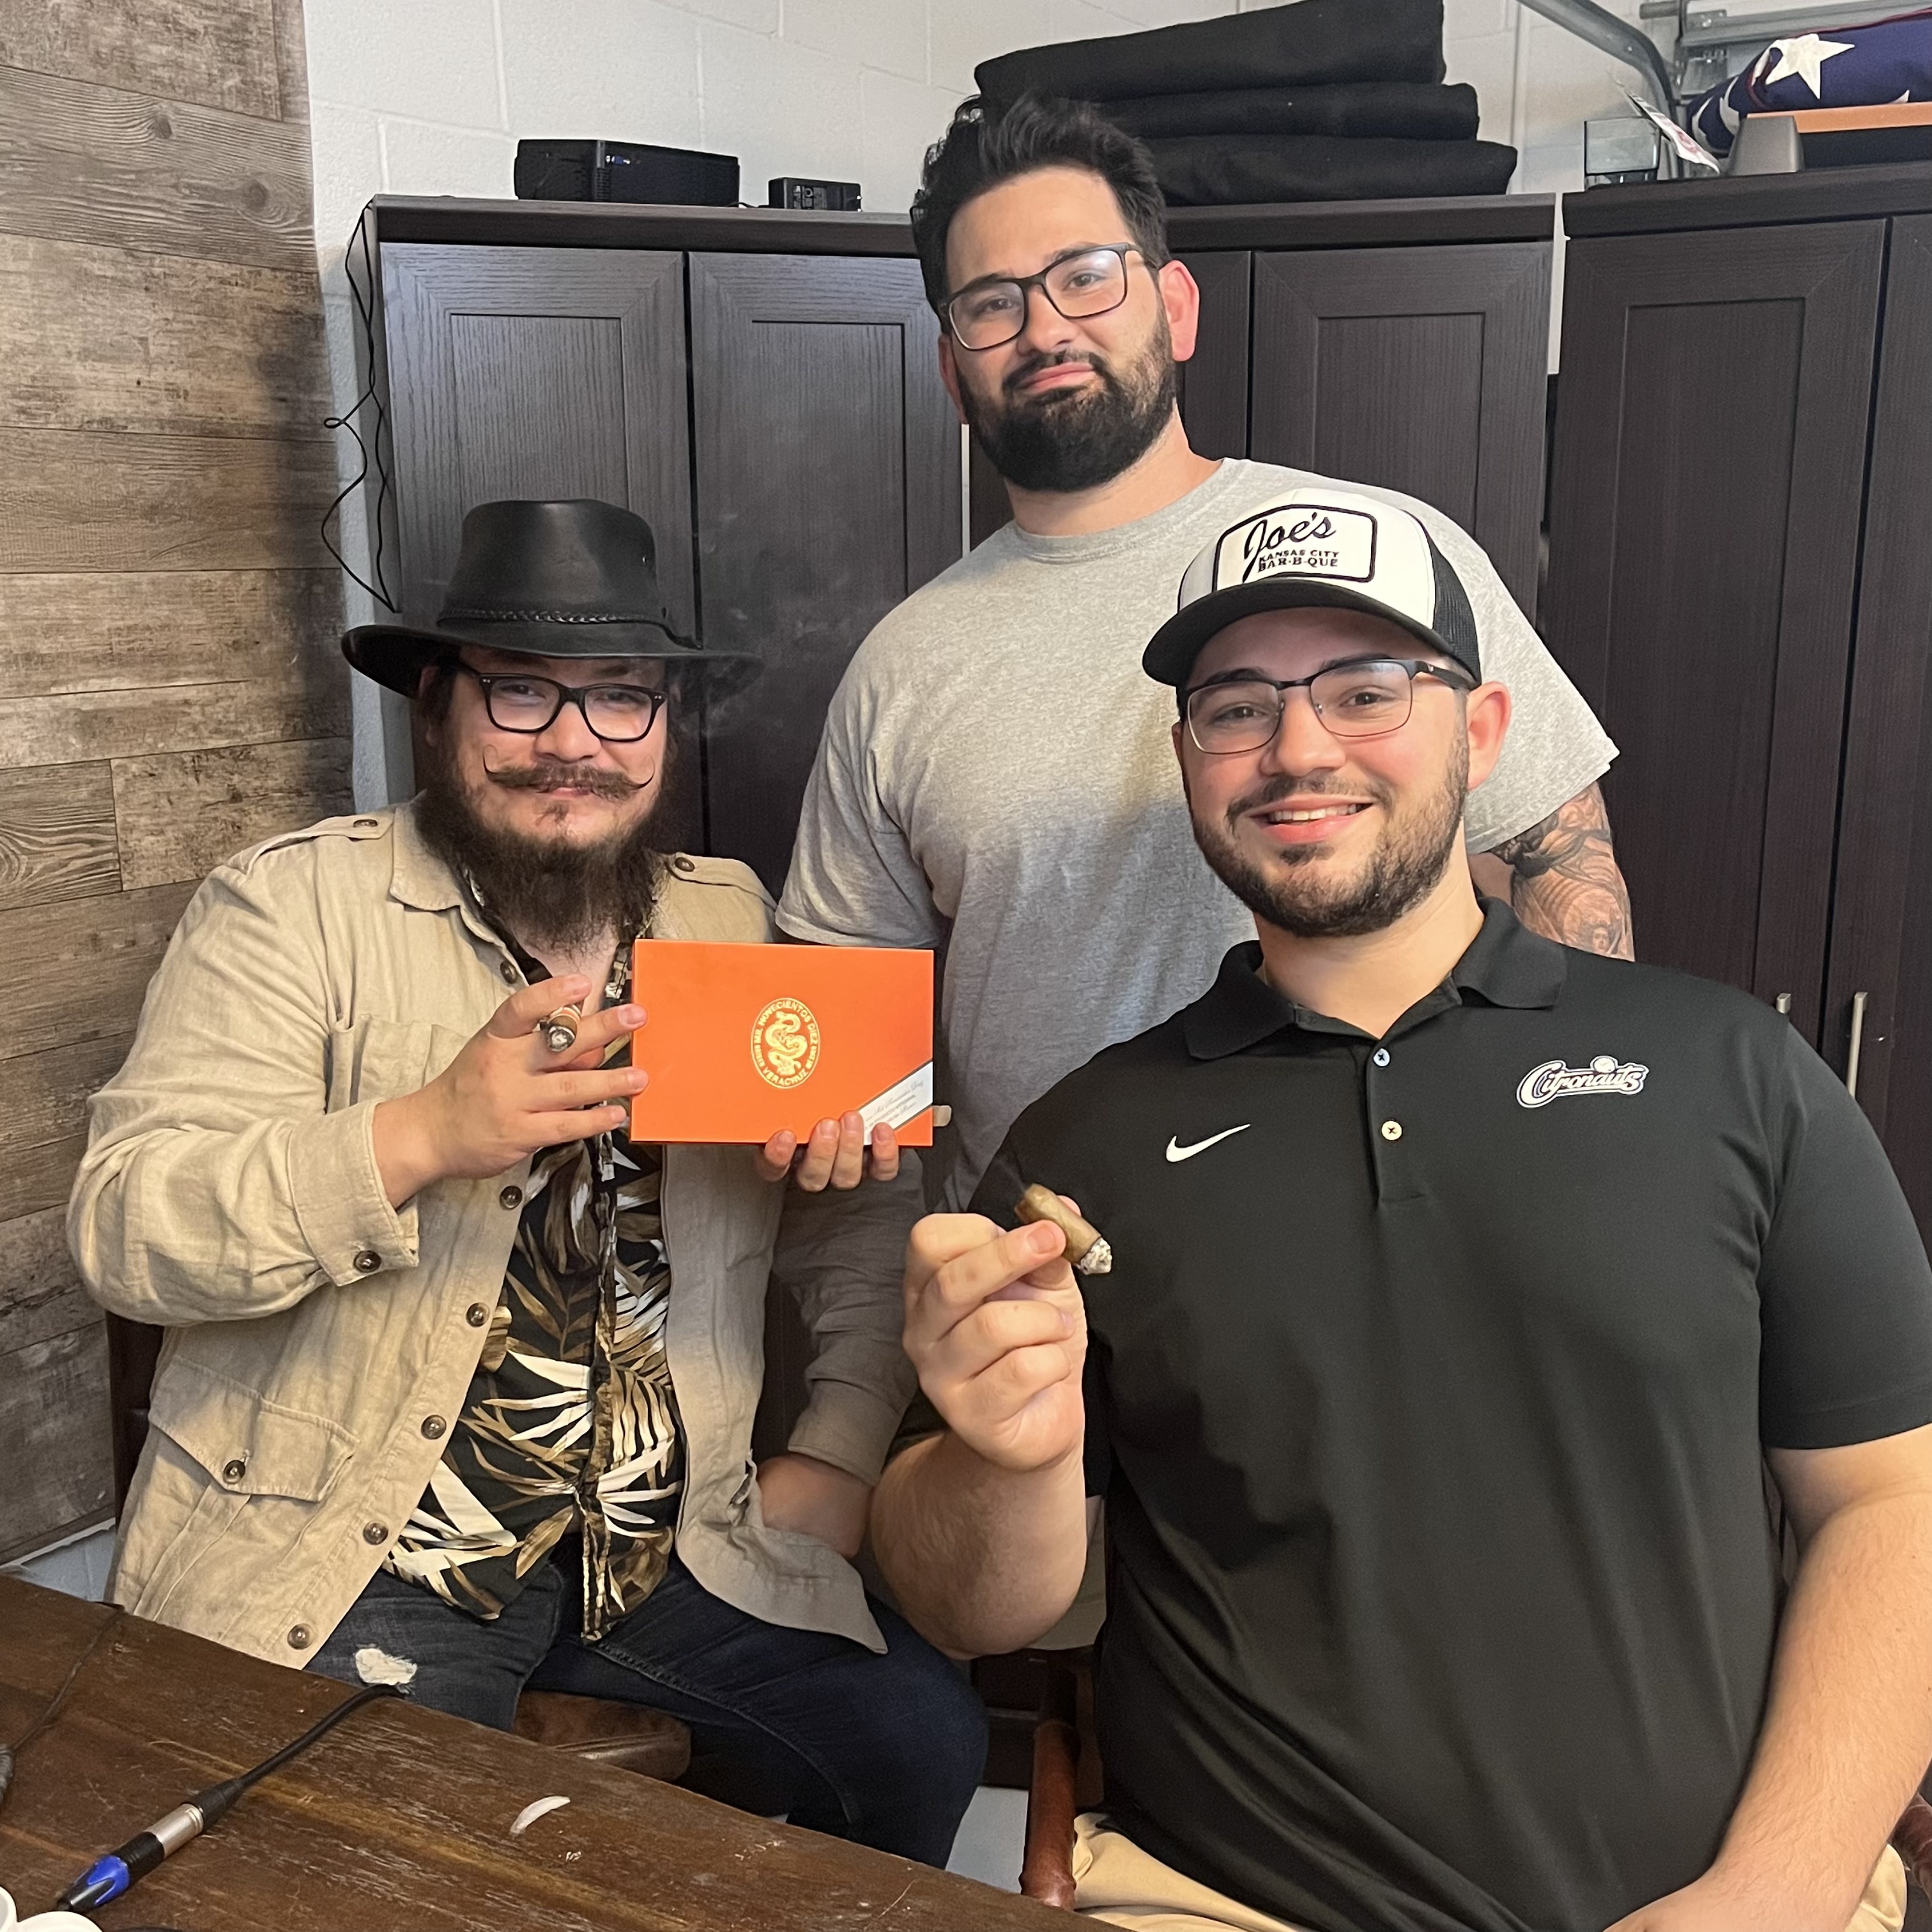 Zach and Mark with Manolo Santiago from Casa 1910 Cigars, post Cigar Guys Podcast.